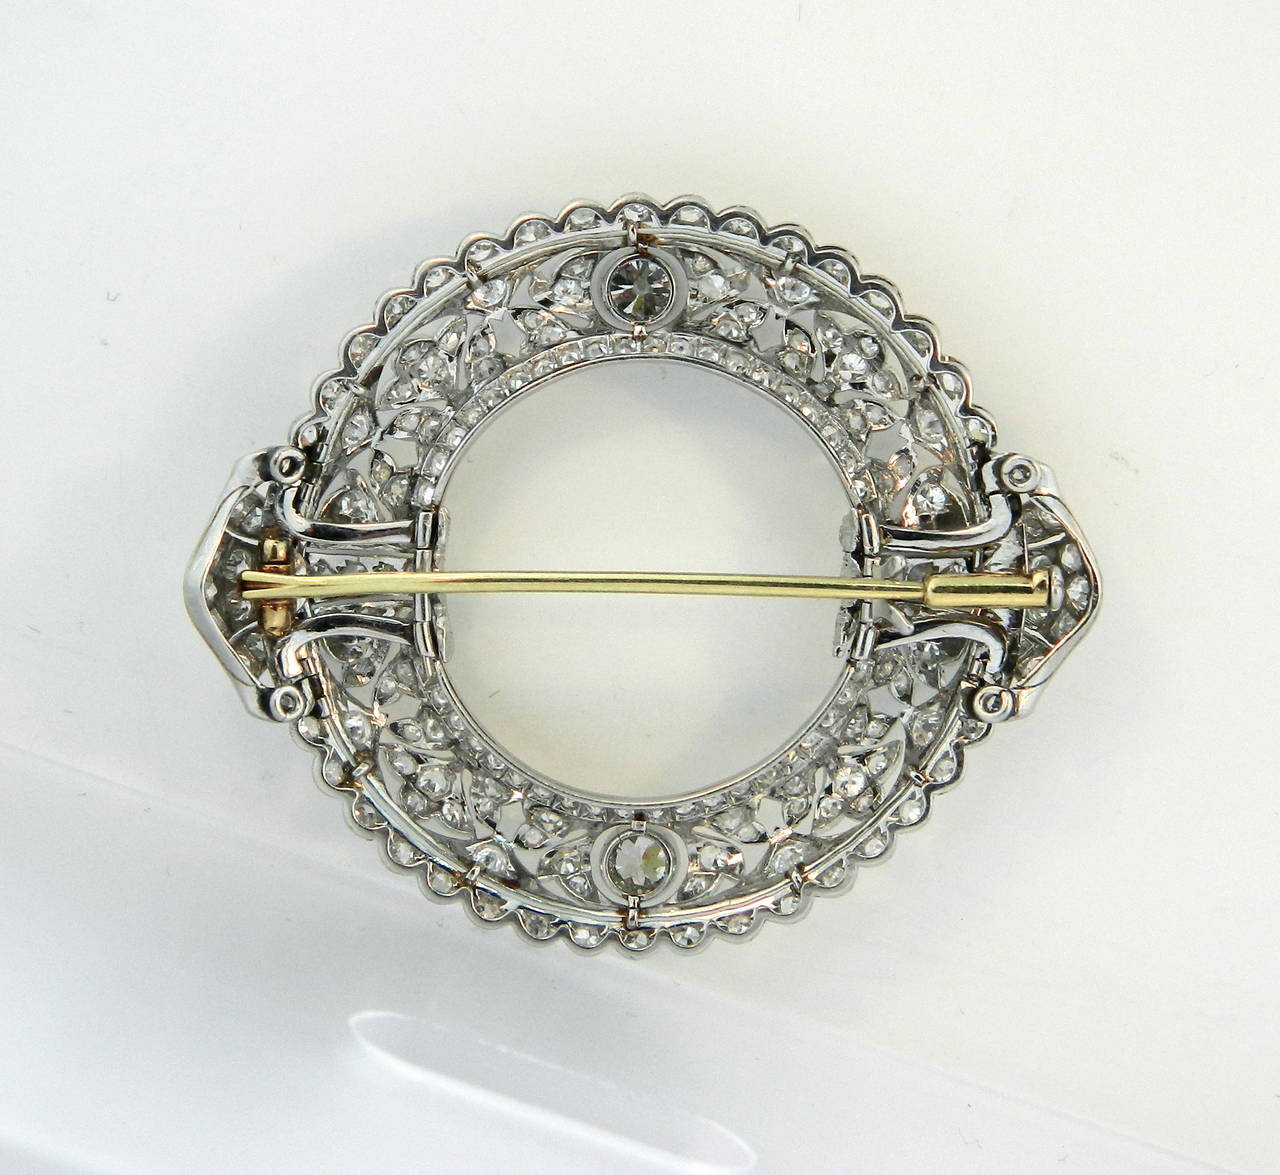 A superb Edwardian, platinum and diamond circle brooch with removable collar clips.